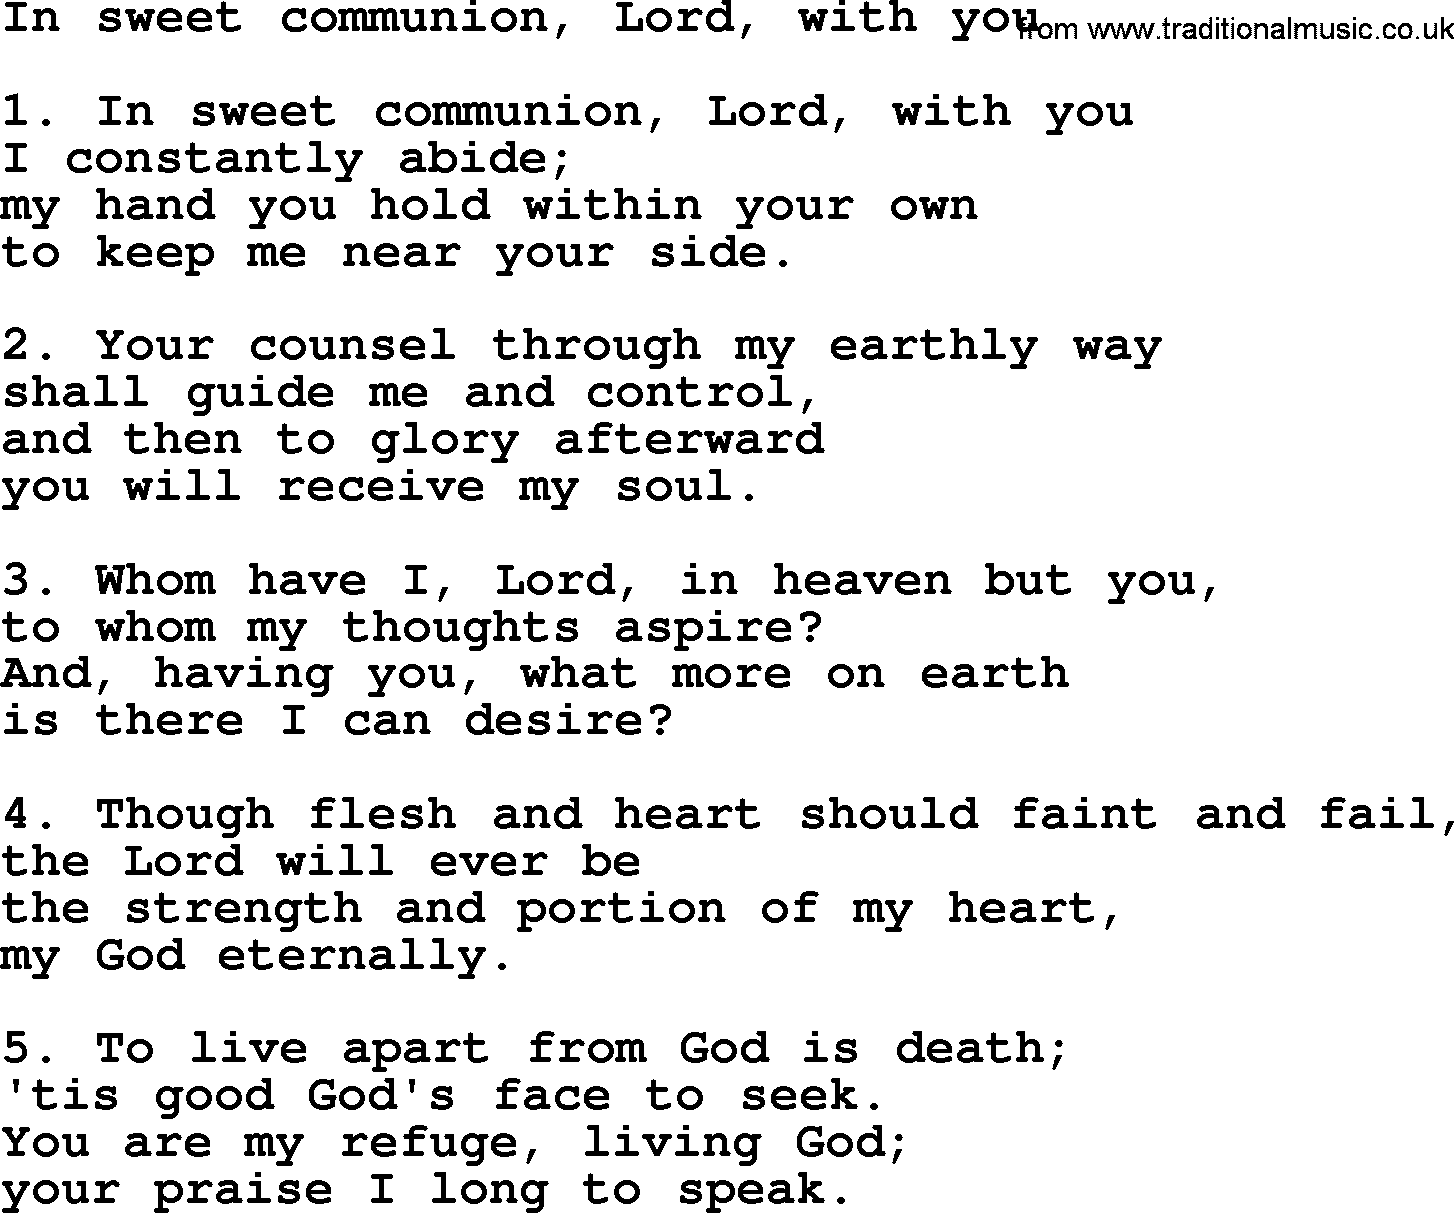 Presbyterian Hymn: In Sweet Communion, Lord, With You - lyrics, and PDF